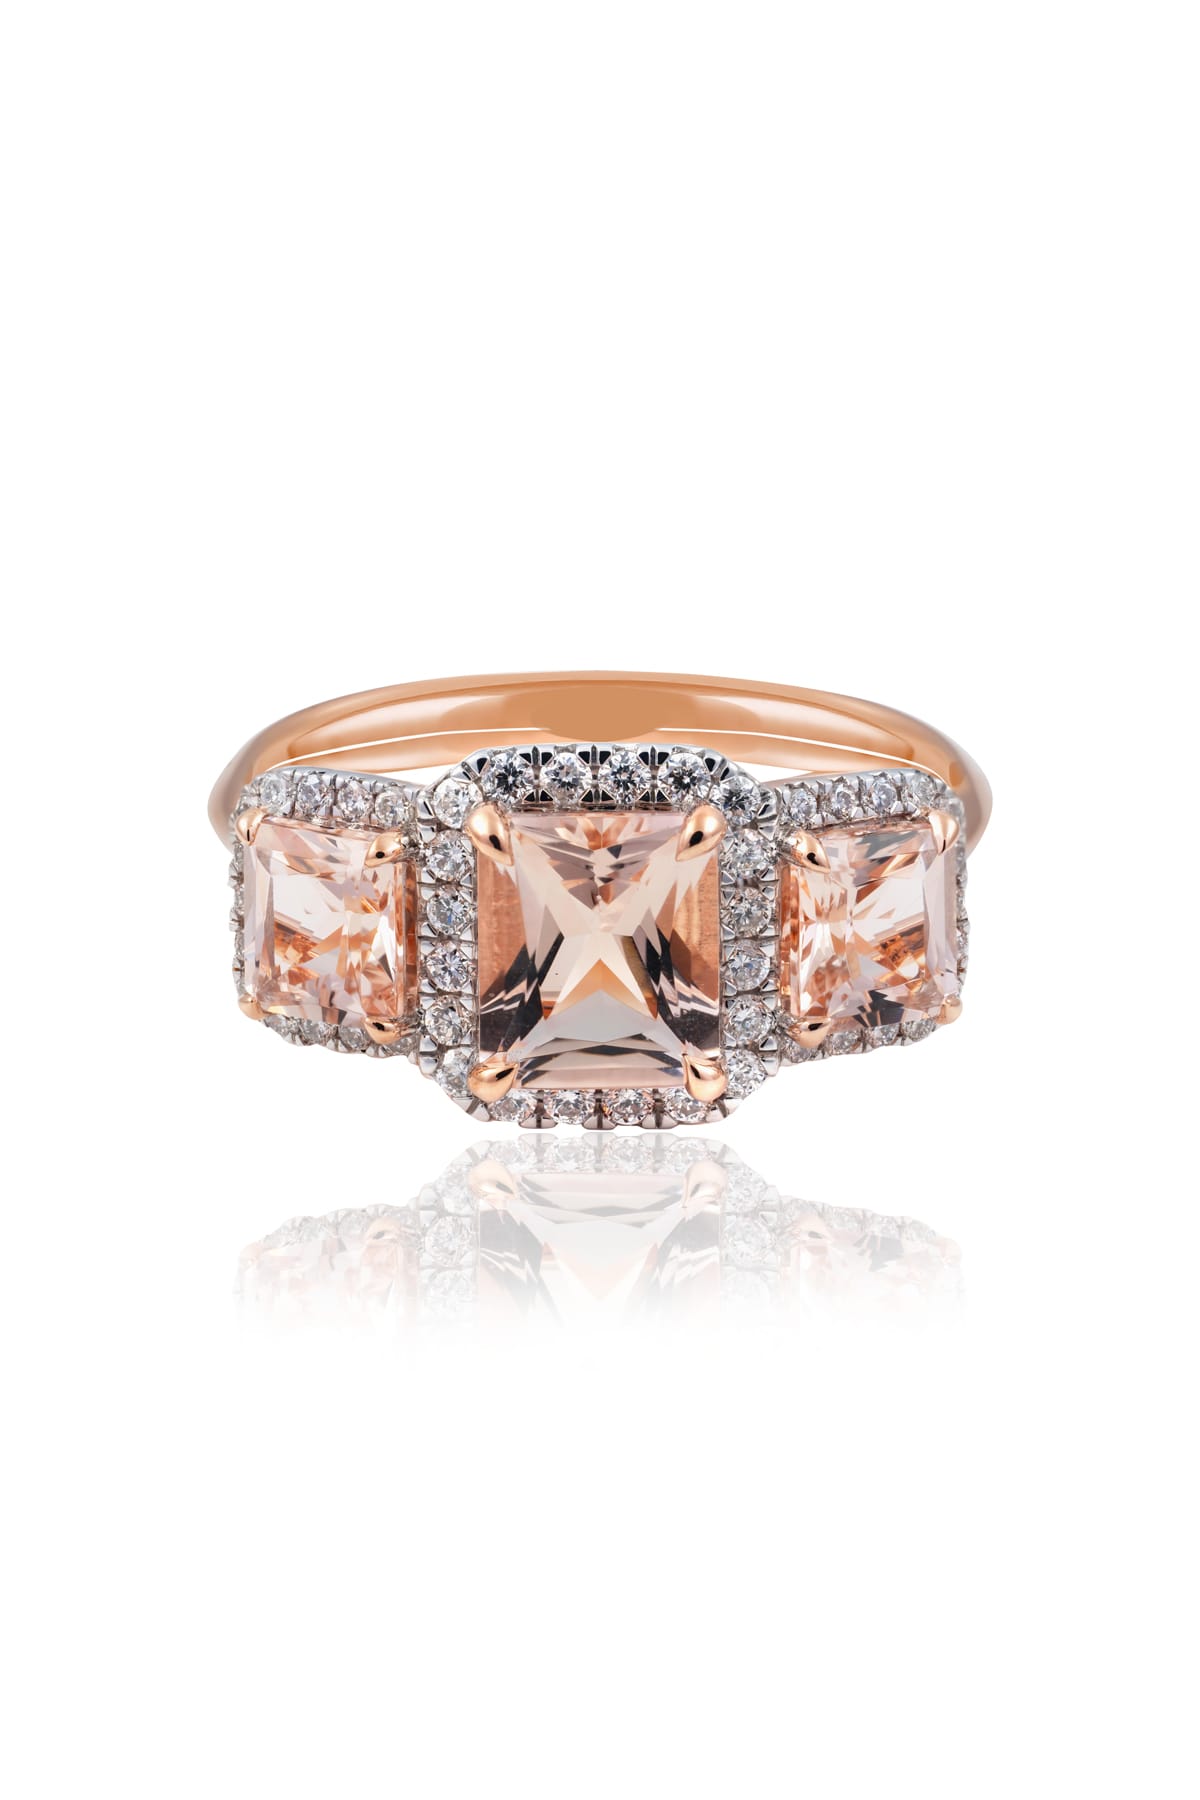 3.09ct Morganite And Diamond 3-Stone Halo Ring from LeGassick.